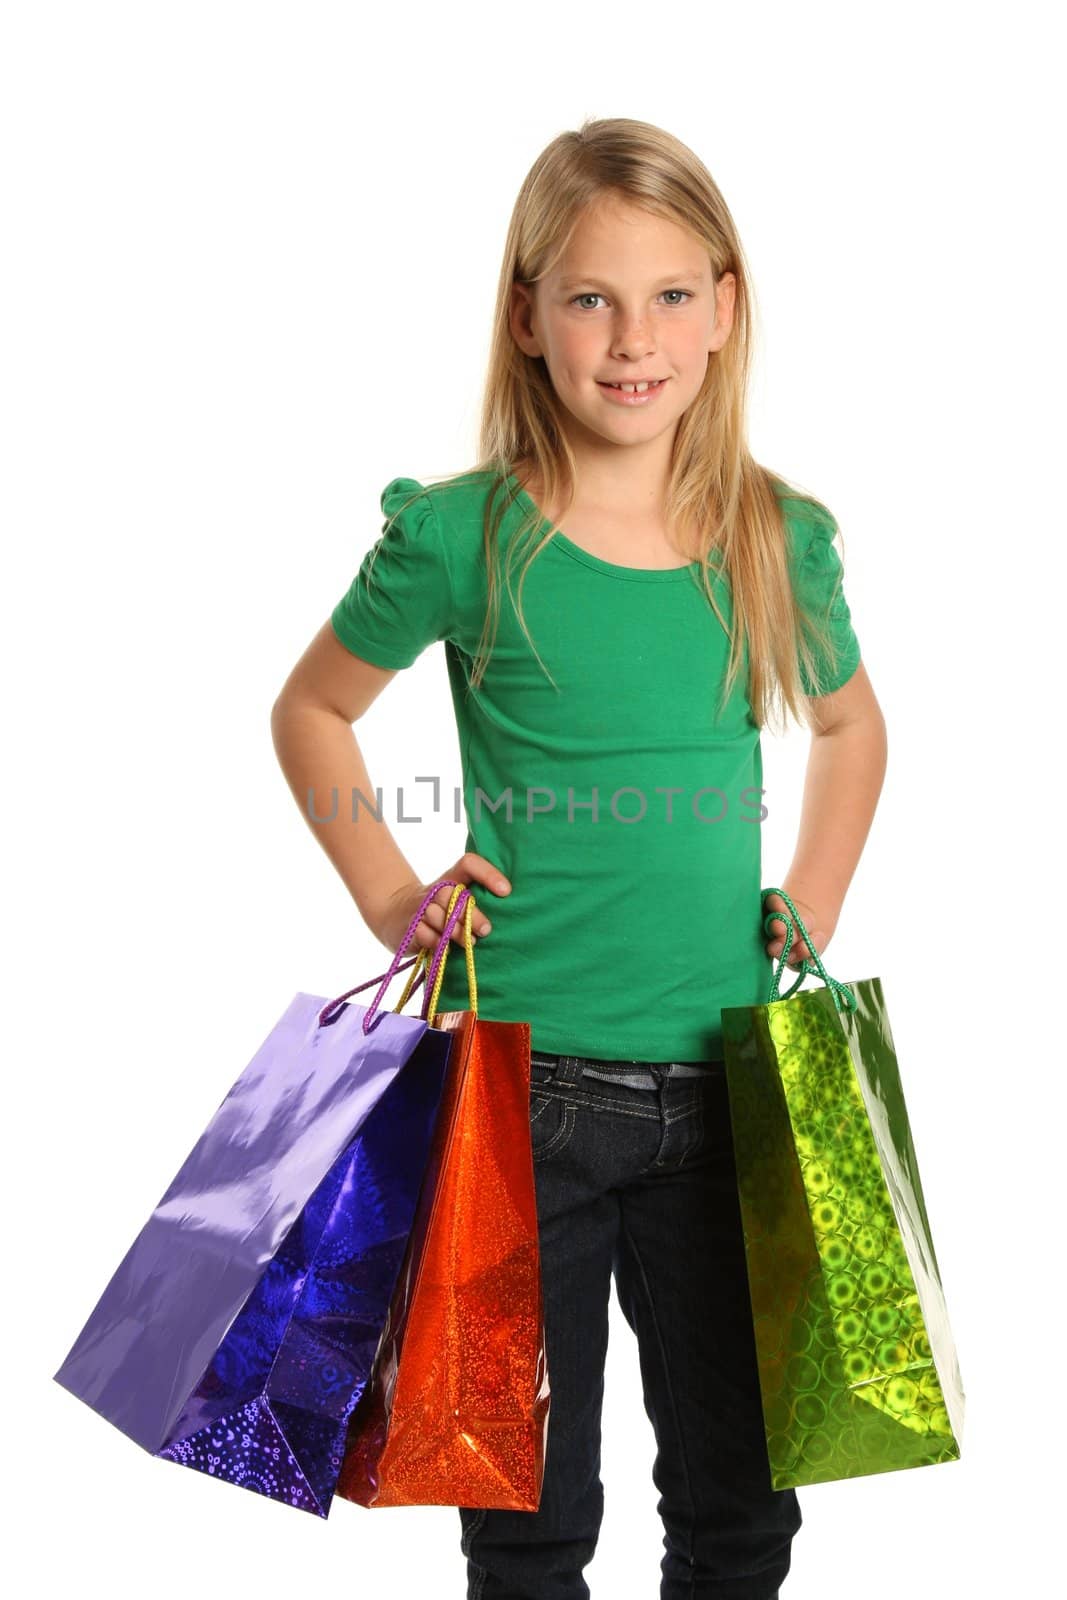 Young trendy shopper girl with colorful bags - isolated on white